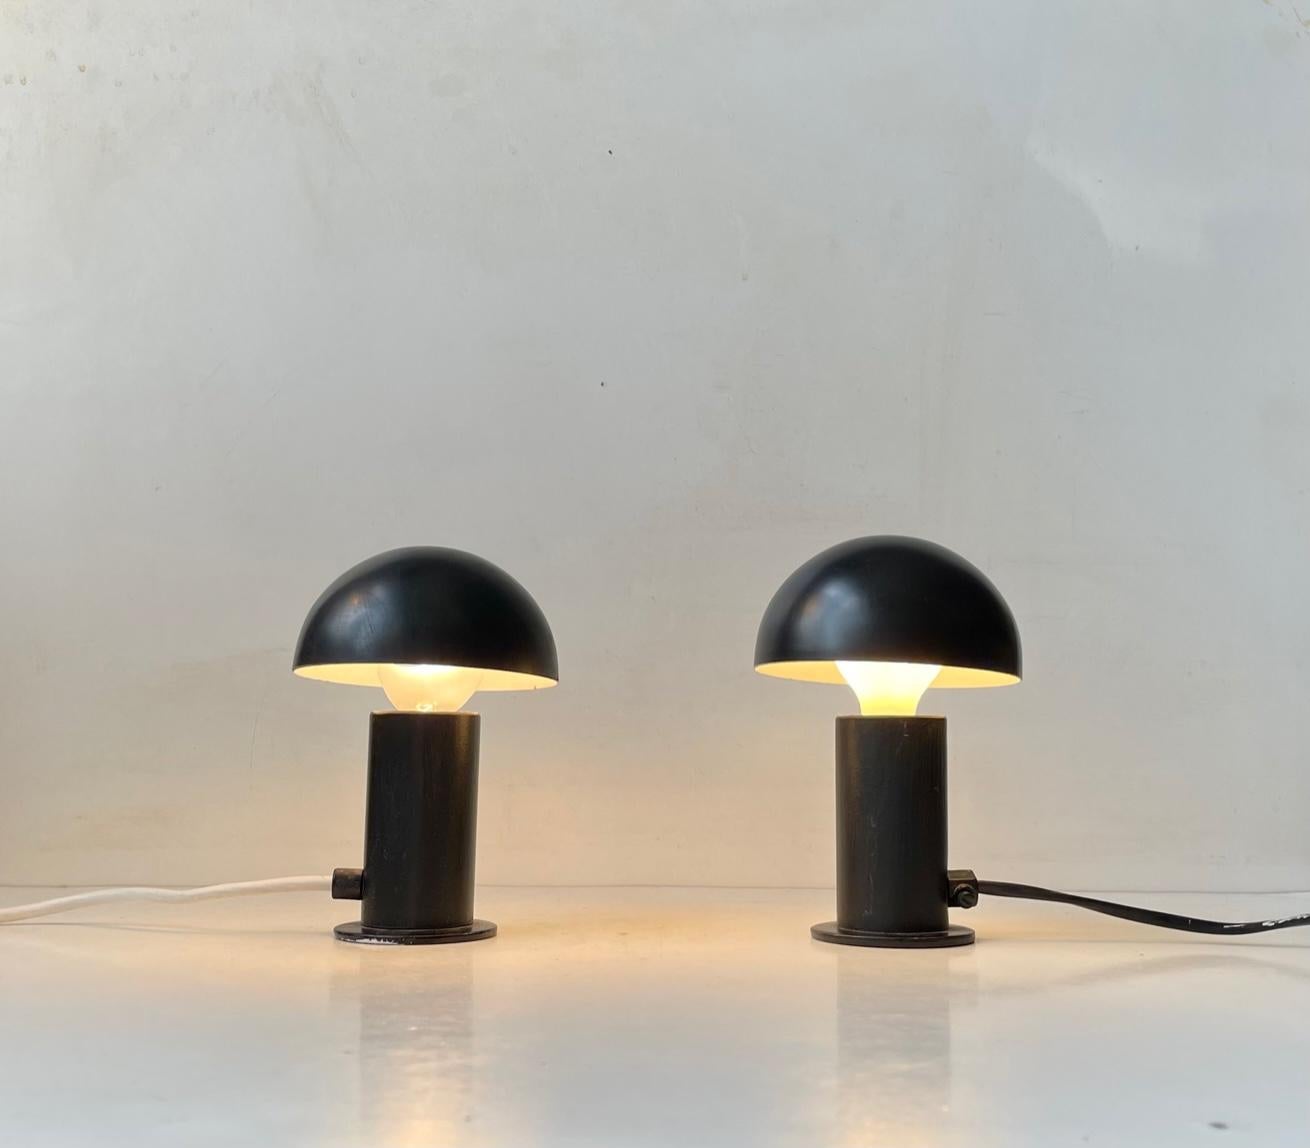 A get vibe of Scandinavian Minimalism and Futurism are present to this small unusual pair of table lights in black powder coated steel. The small globe-shaped shades are adjusted by hand to the desired positions. Very simple and practical. The on/of